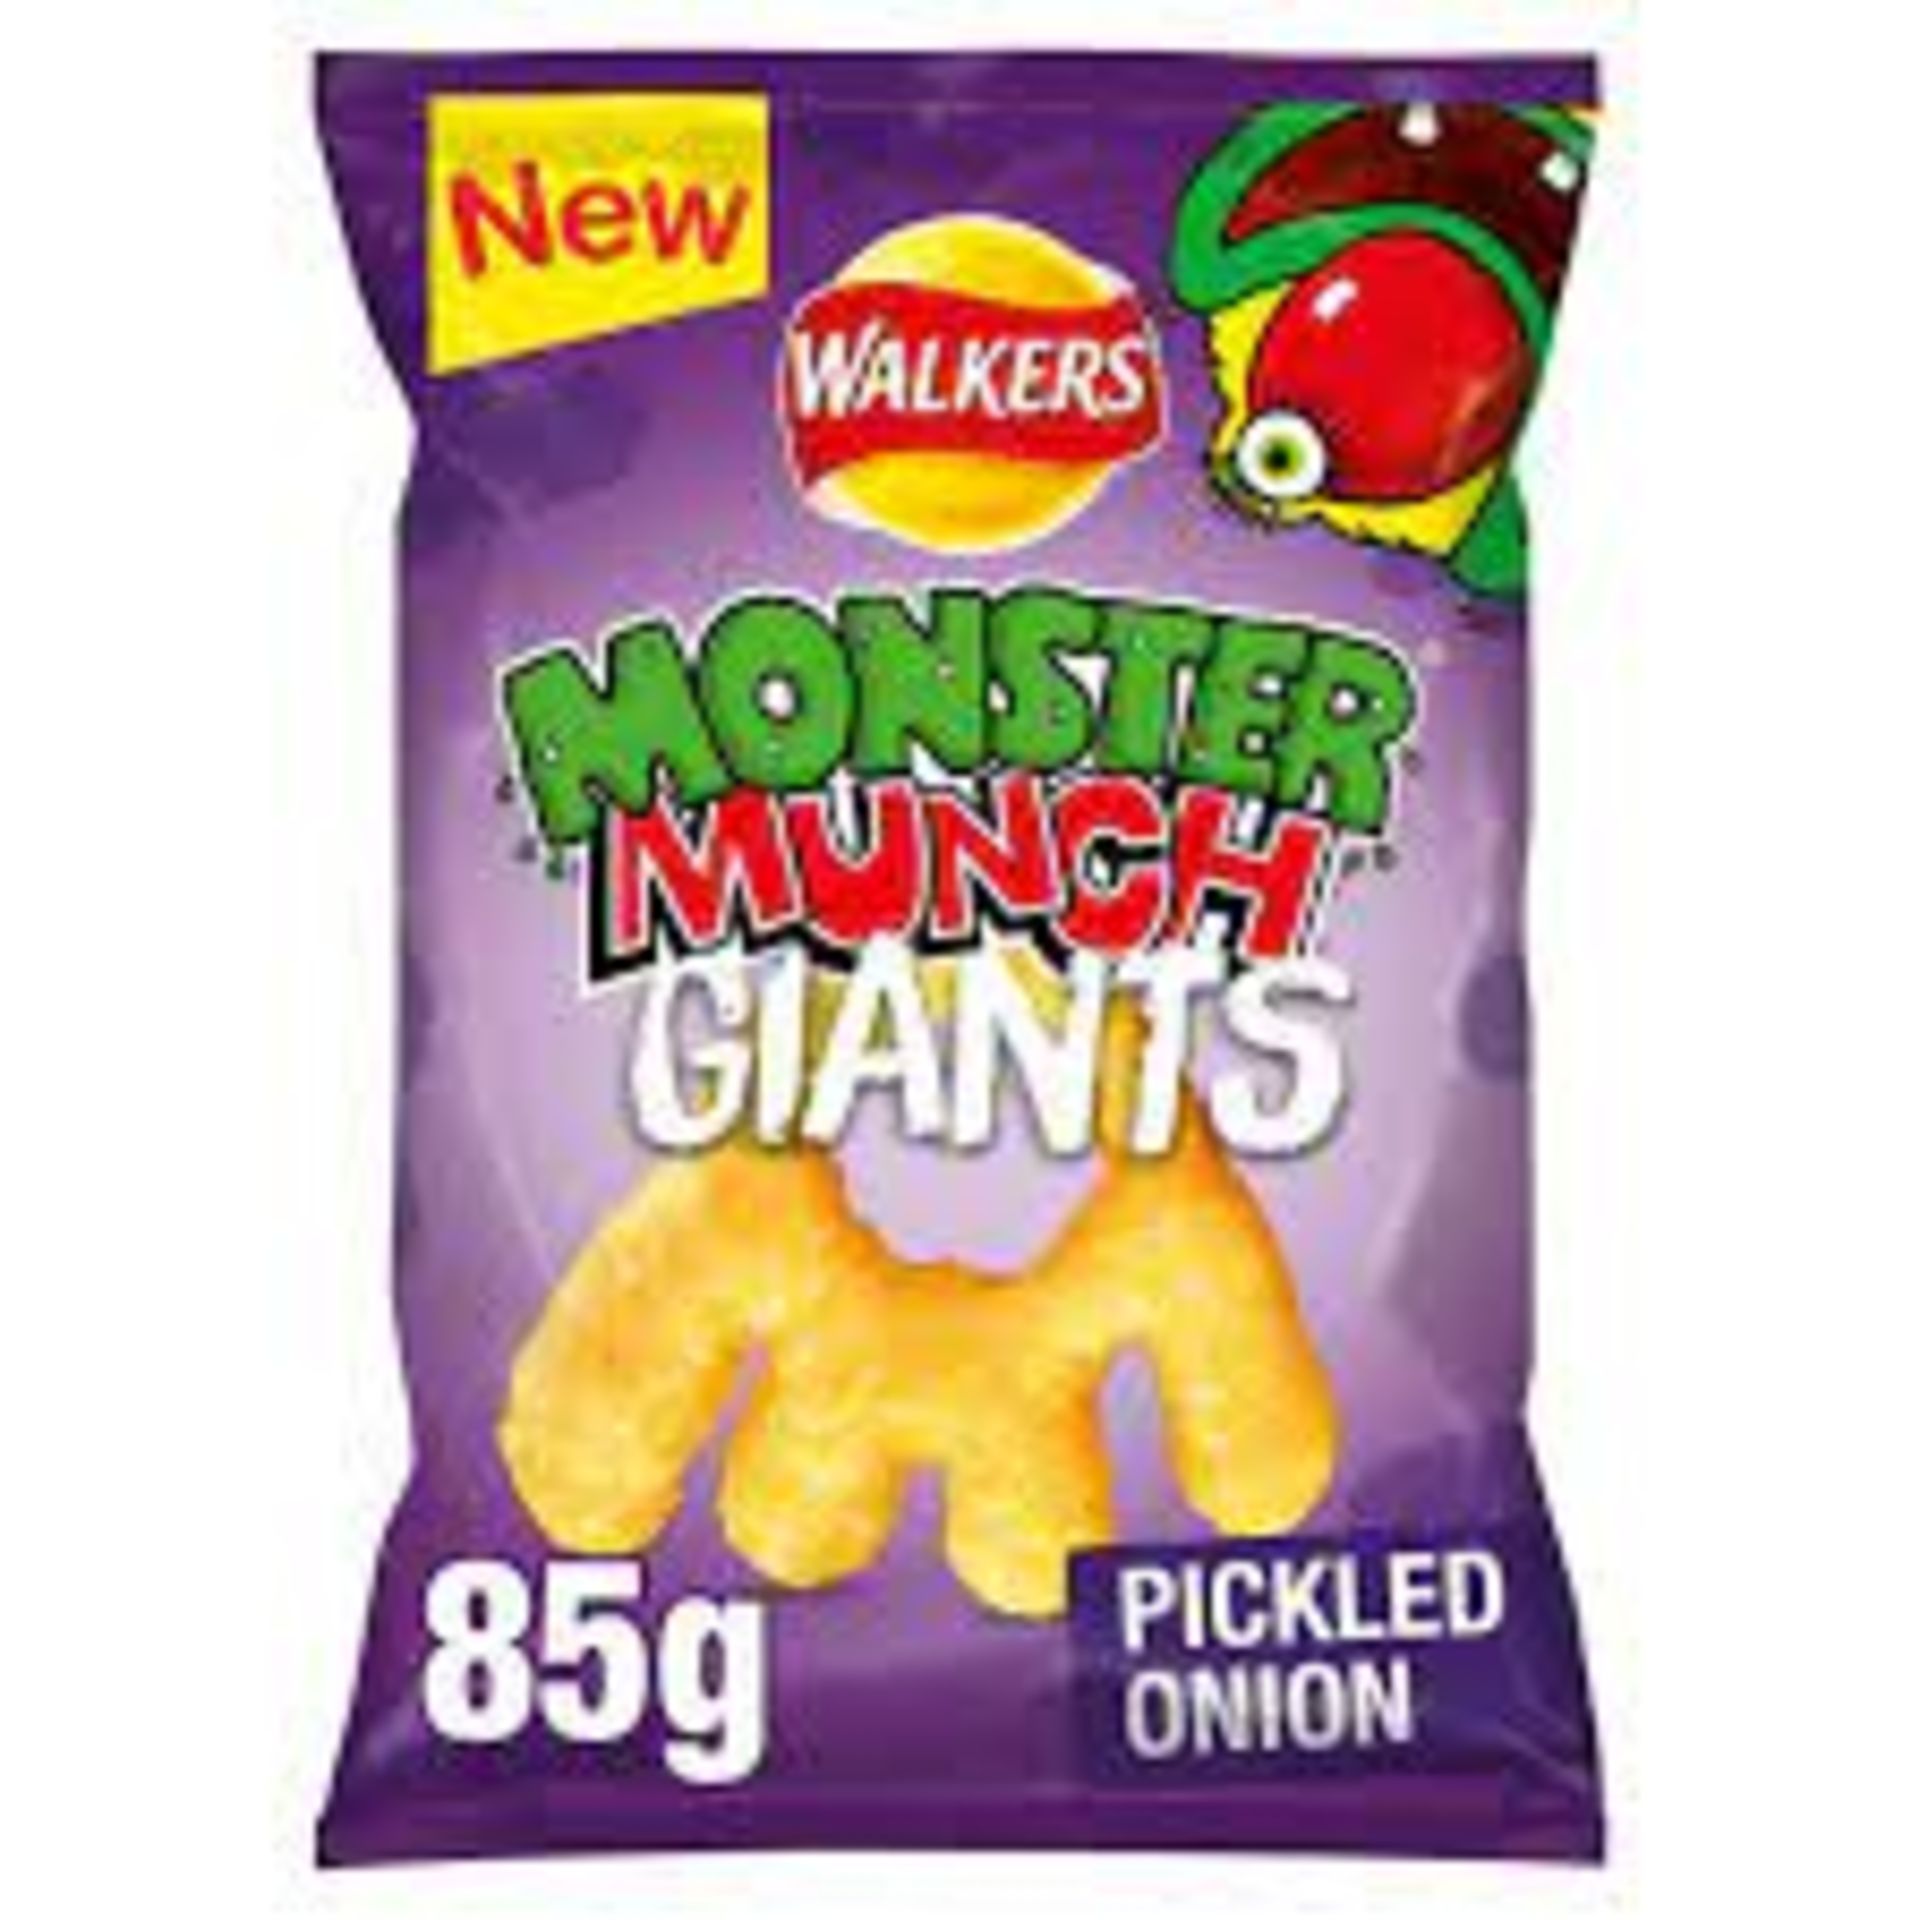 RRP £669 (Approx. Count 42) spW48m5785R Walkers Monster Munch Giants Pickled Onion 85g (Case of